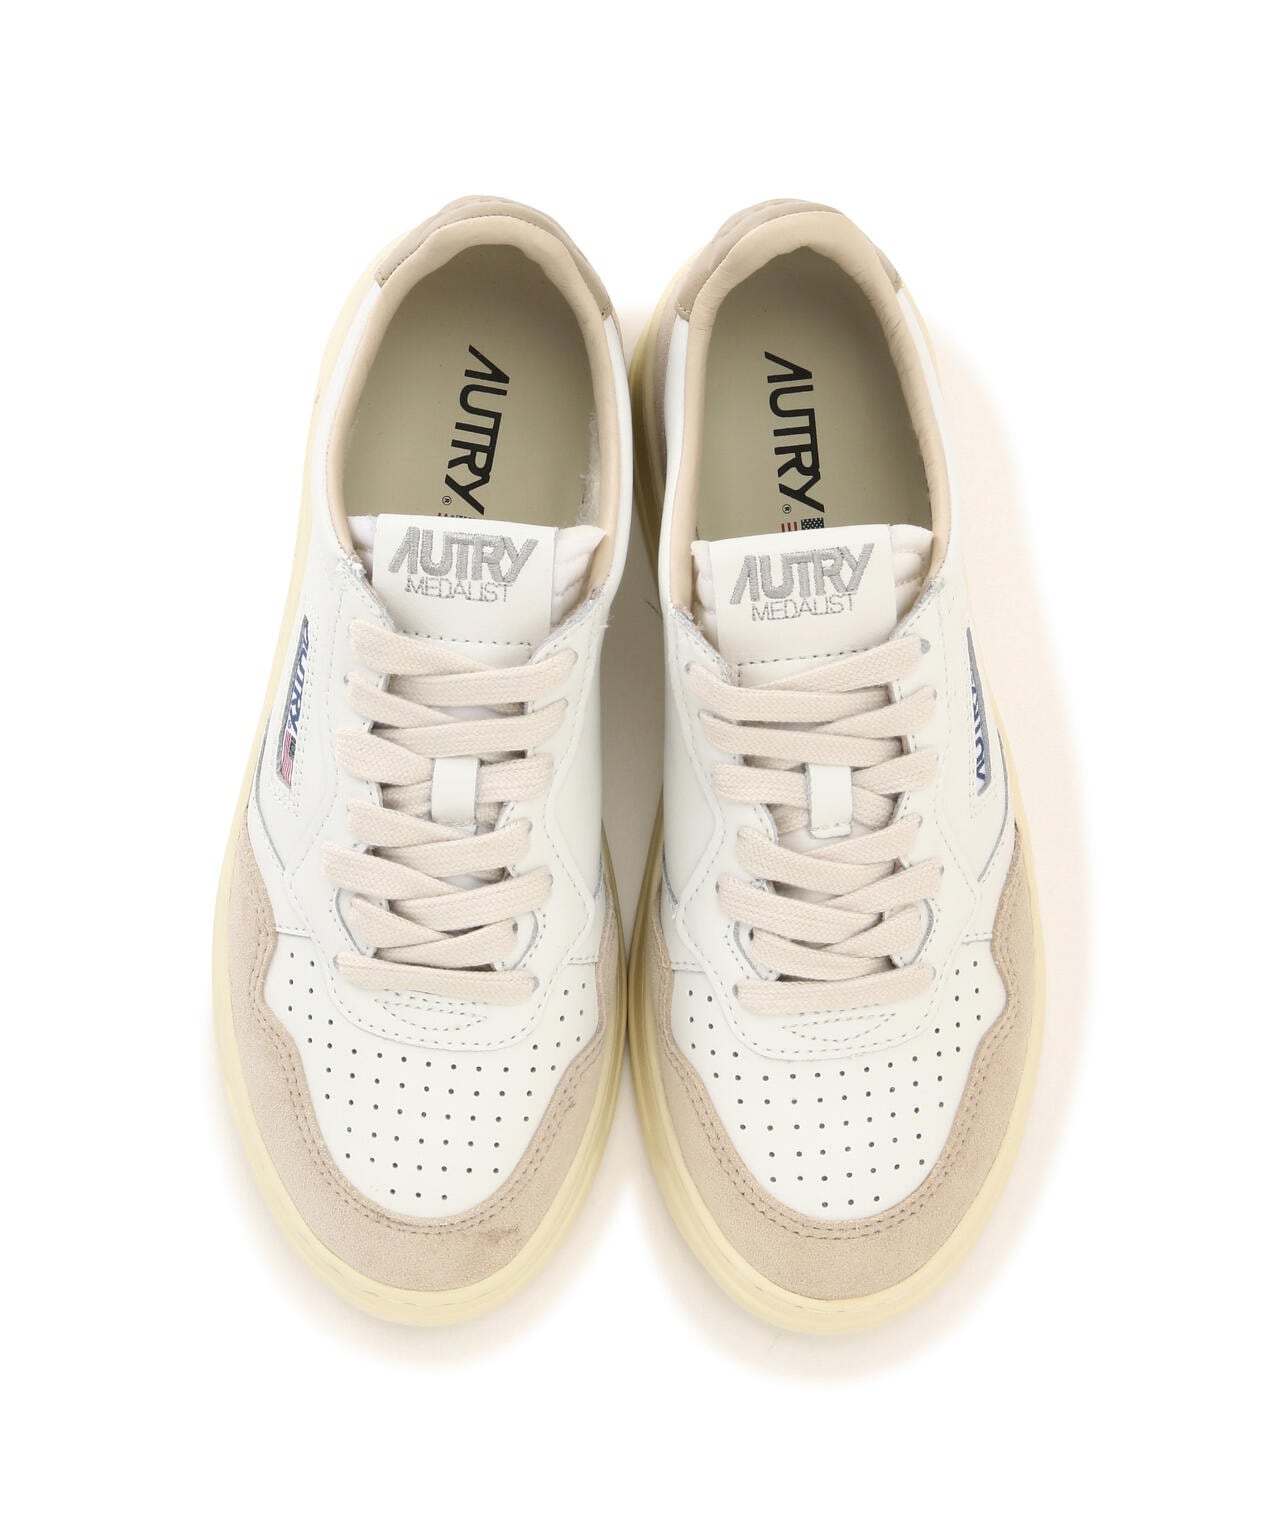 AUTRY (オートリー) WOMEN'S スニーカー MEDALIST_LOW_LEATHER/SUEDE 